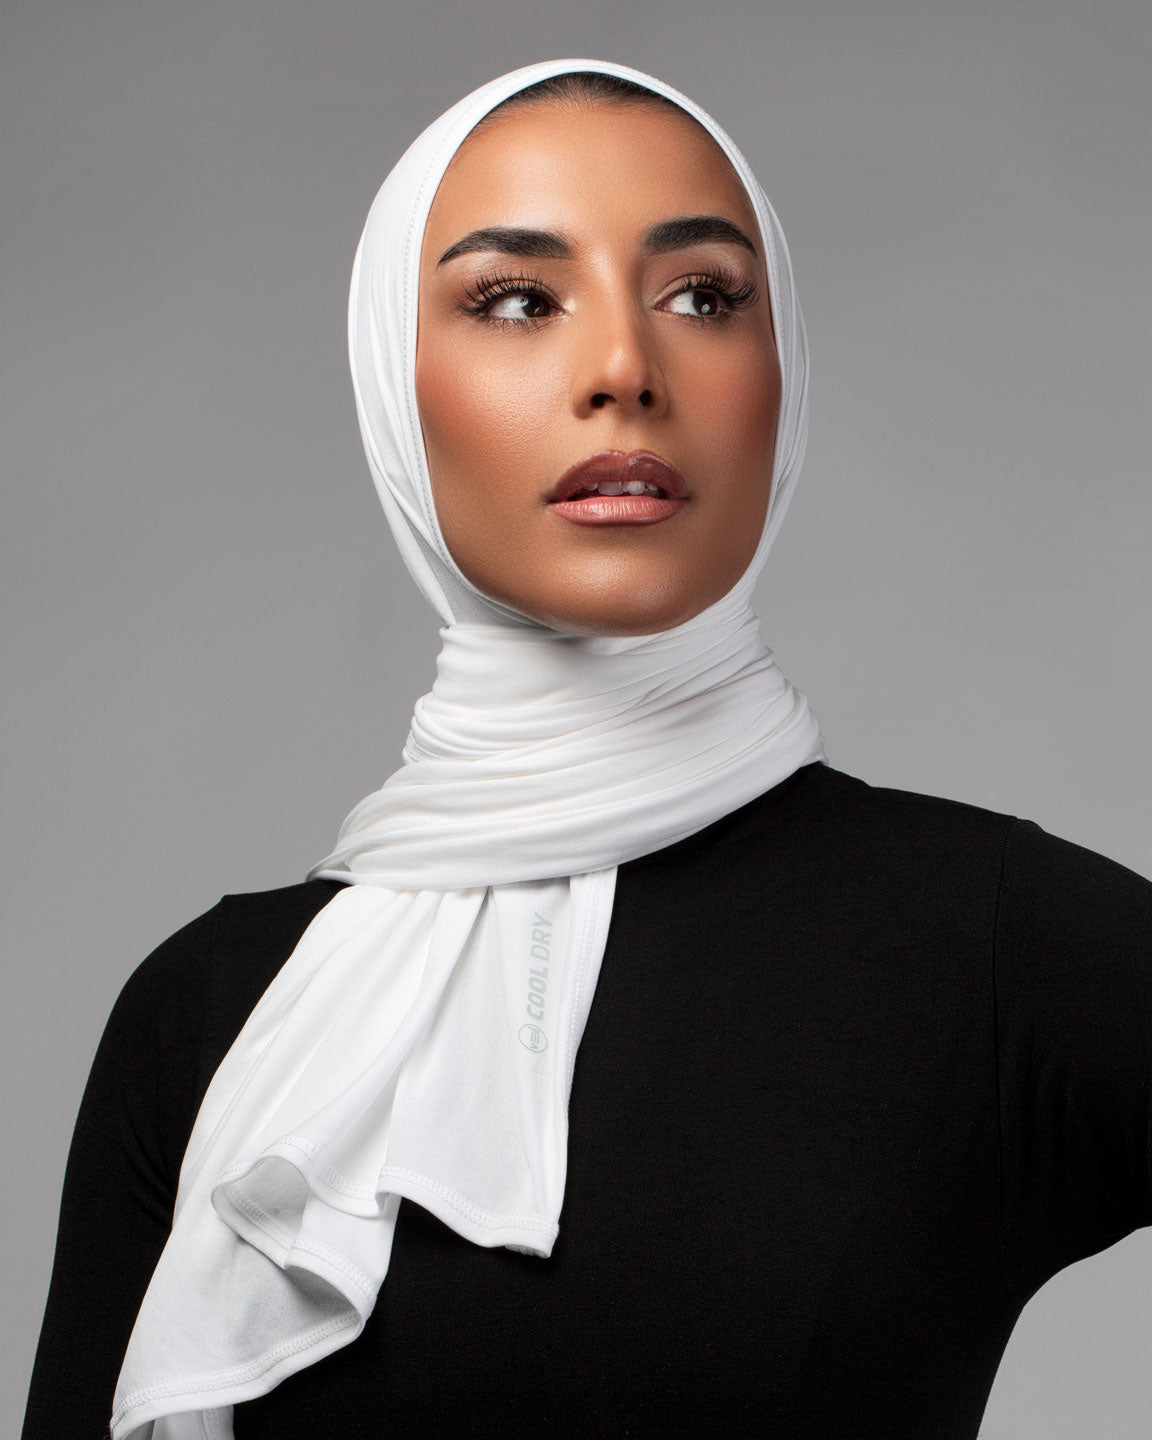 Cool Dry Shawl 2.0 in white by Veil Garments. Sports hijab collection.